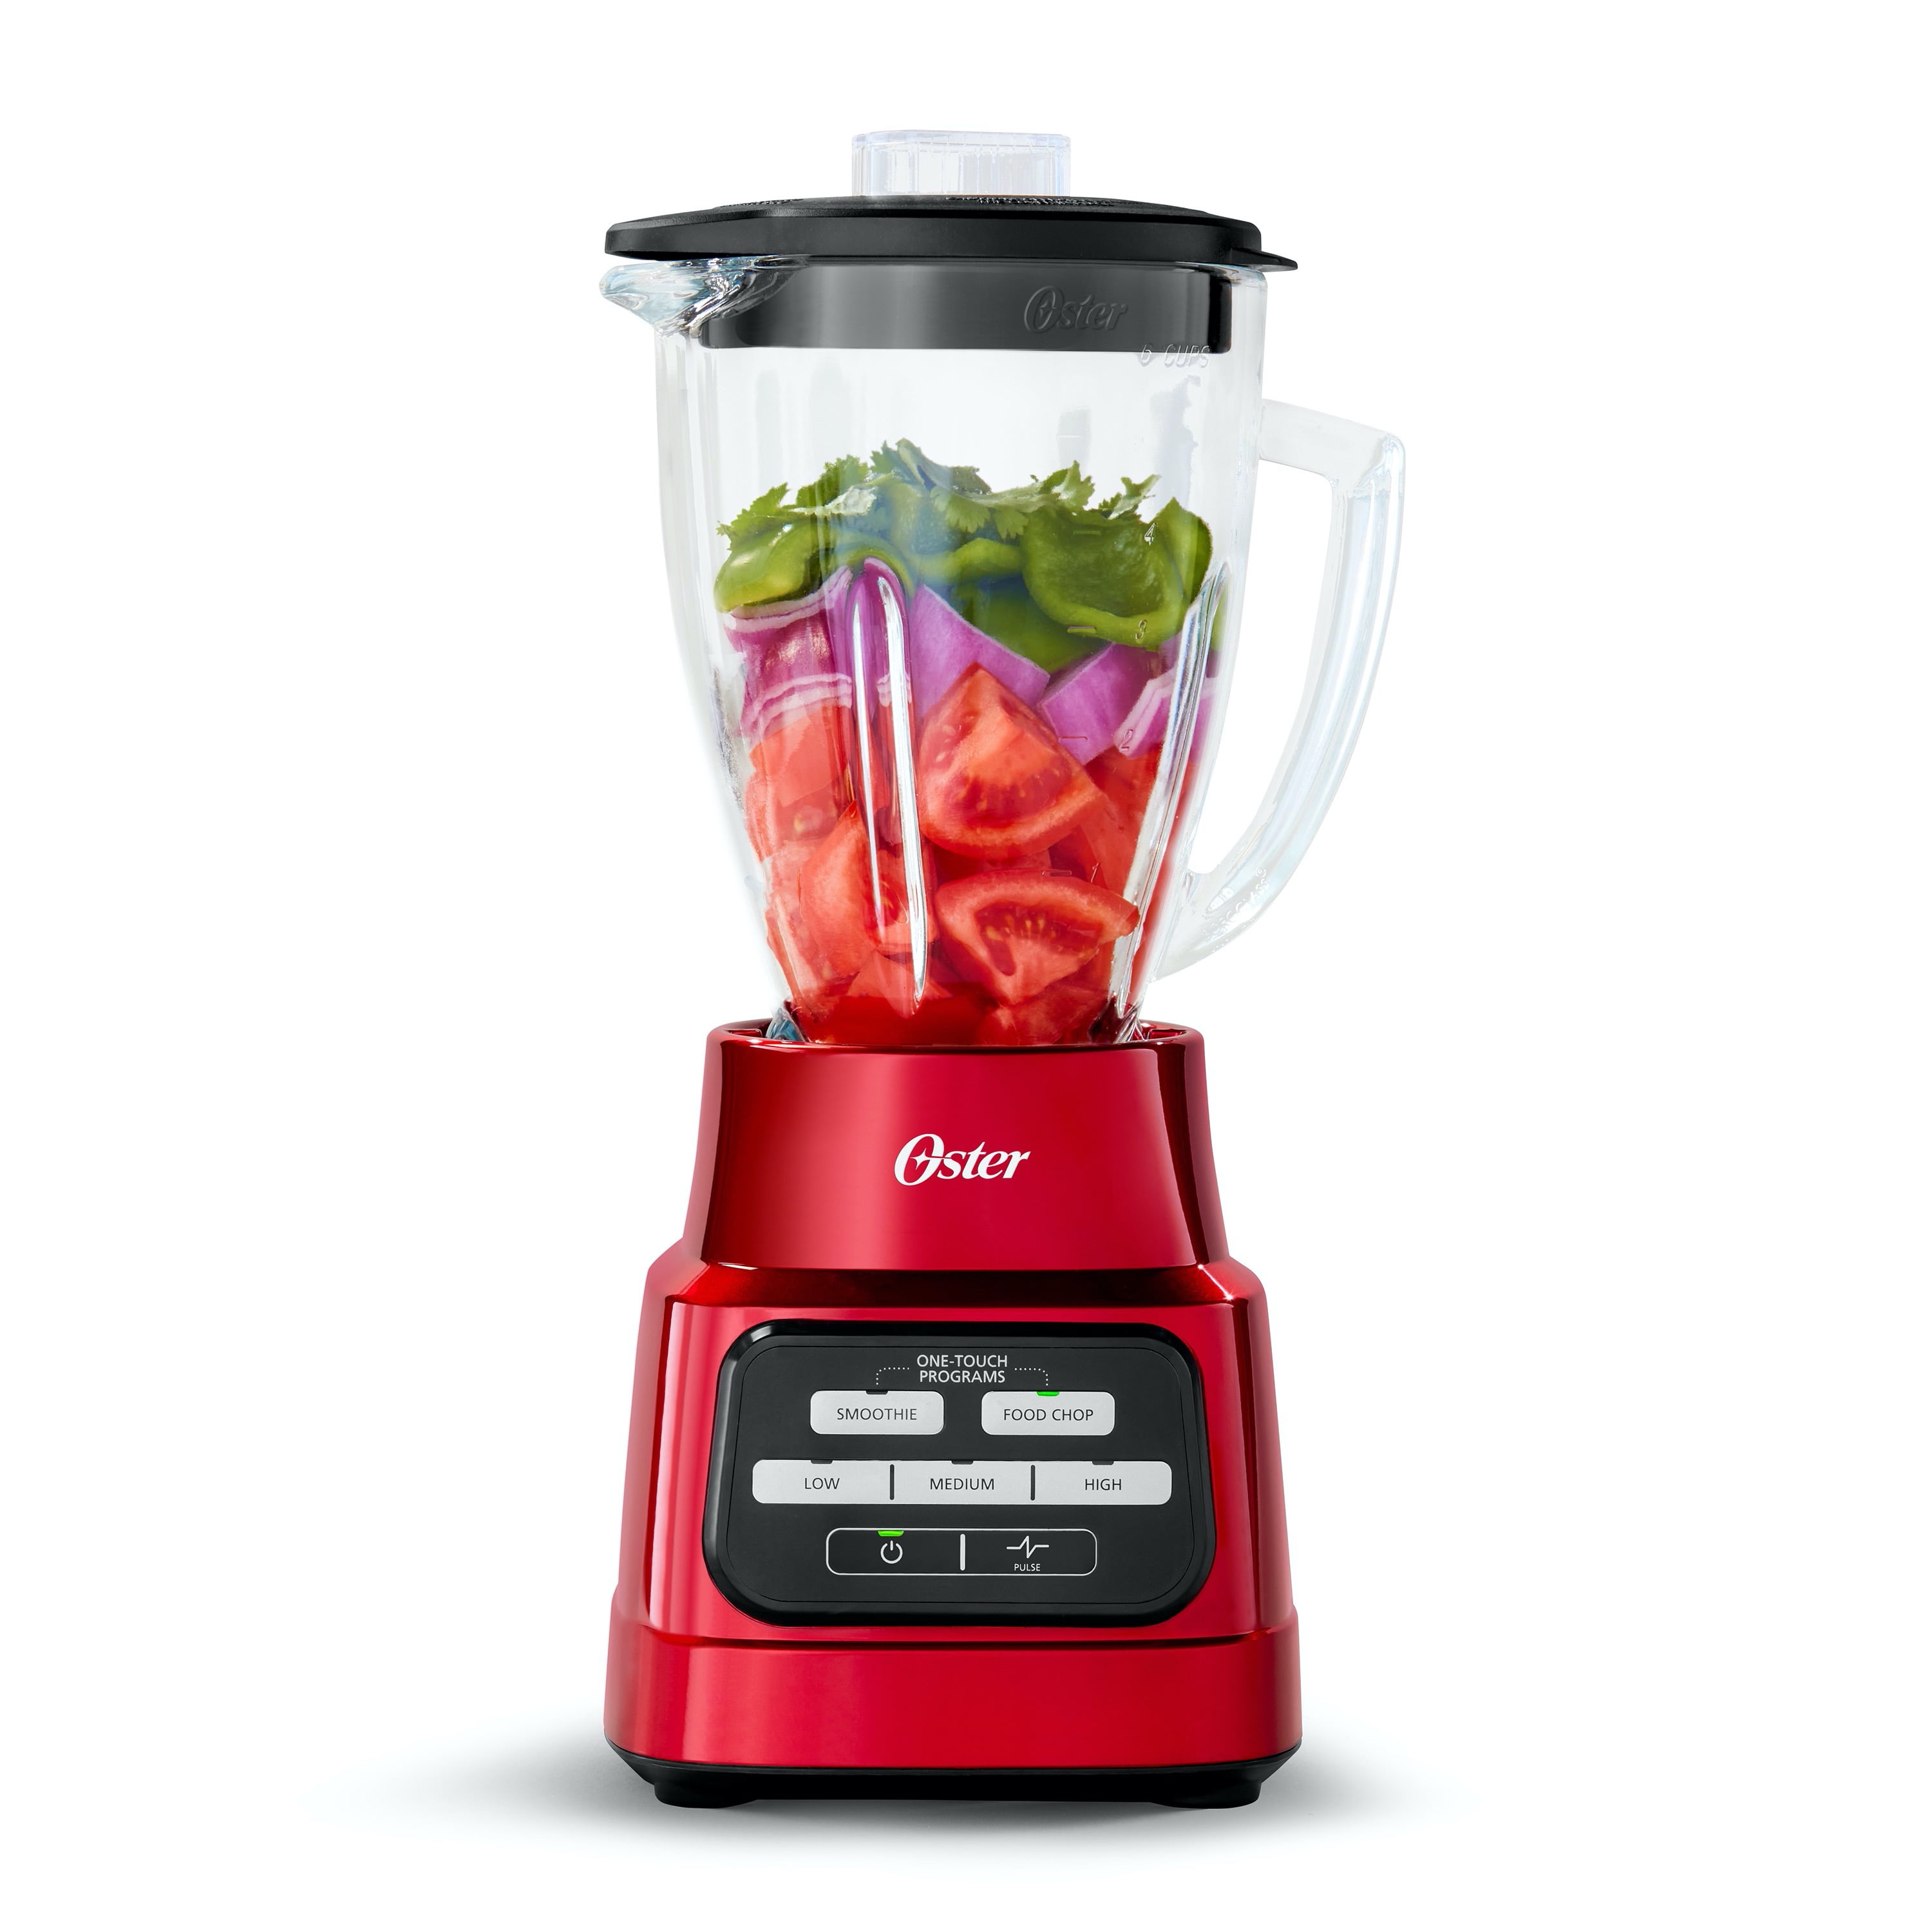 sammensatte Indica Tjen Oster One-Touch Blender with Auto-Programs and 6-Cup Boroclass Glass Jar -  Walmart.com